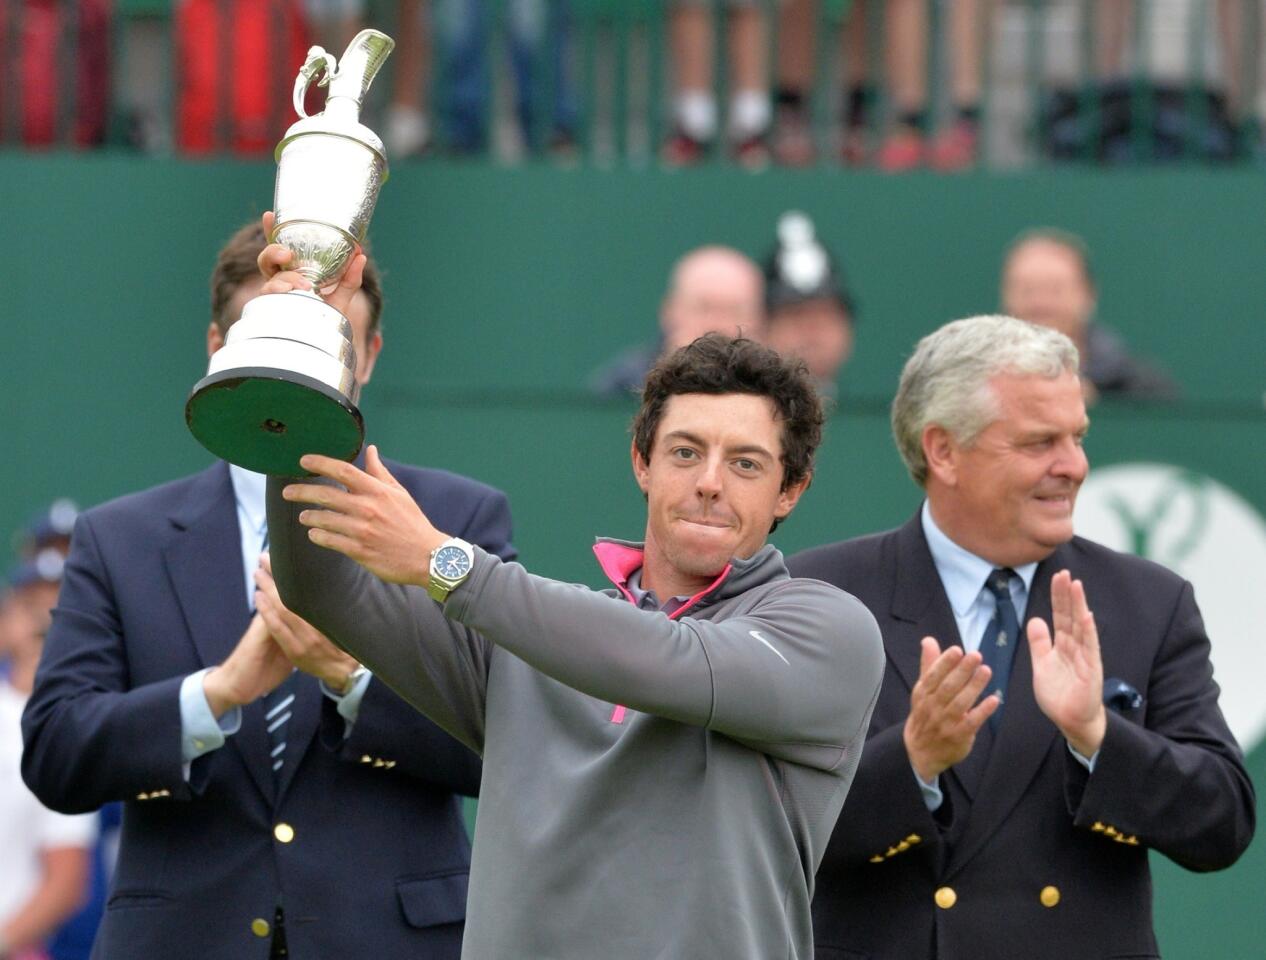 Rory McIlroy lofts the Claret Jug after winning the 143rd Open Championship at Royal Liverpool on Sunday in Hoylake, England.